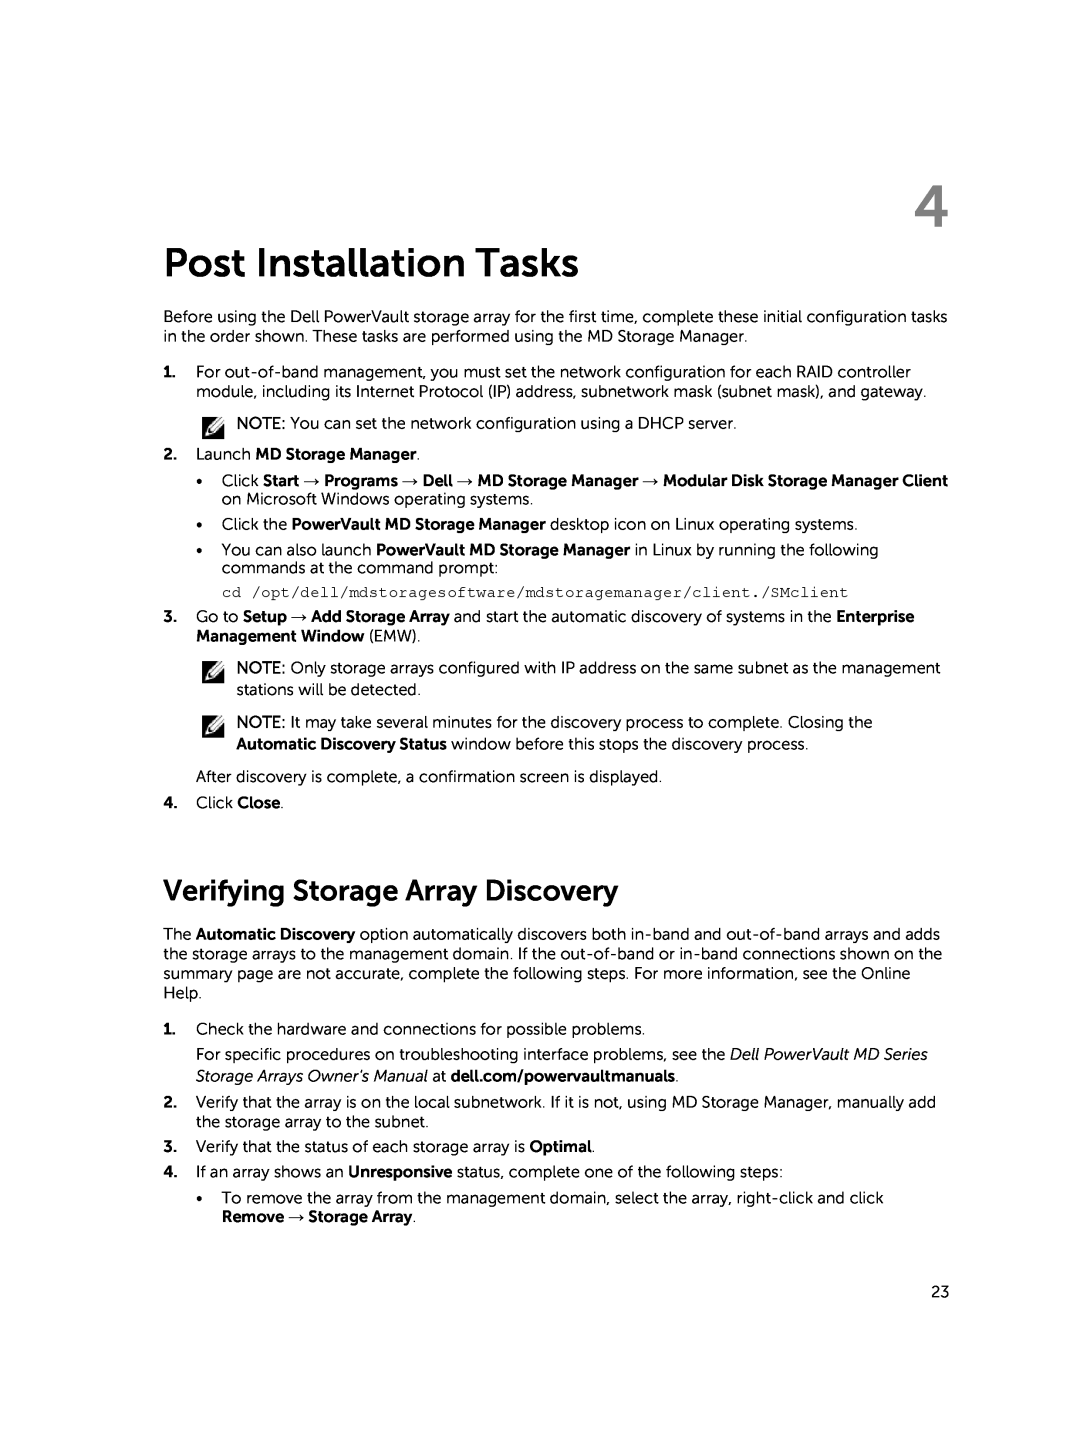 Dell MD3460 manual Post Installation Tasks, Verifying Storage Array Discovery 